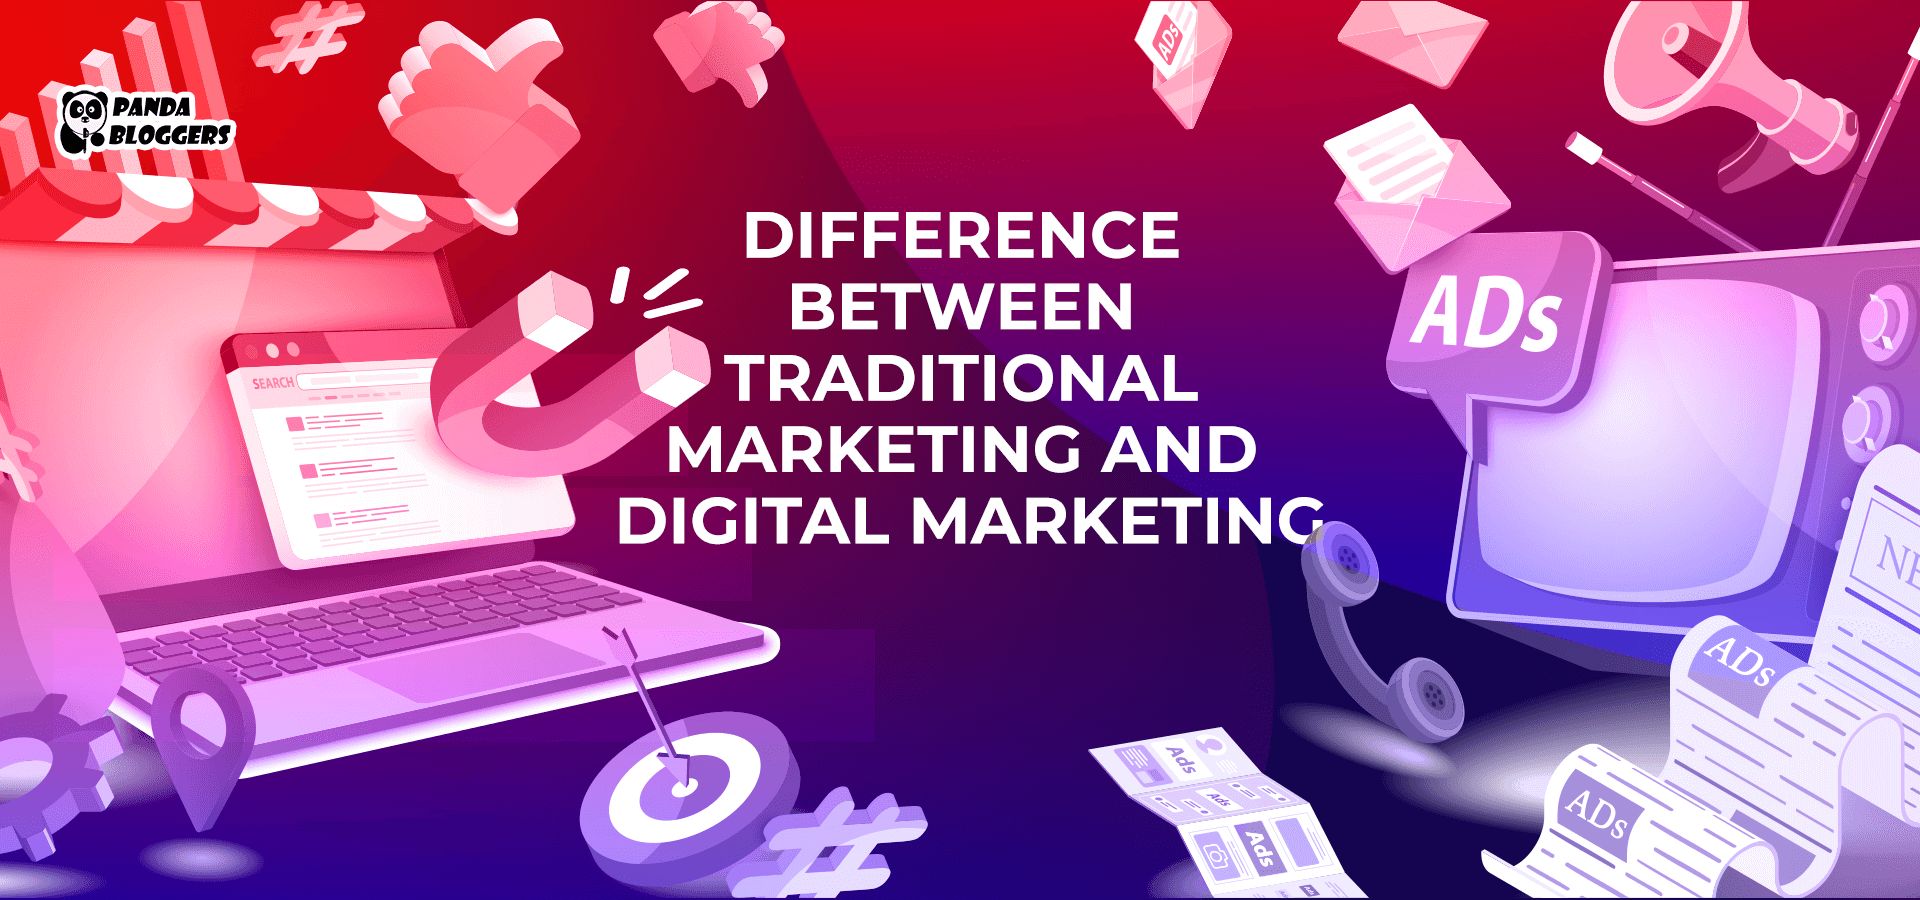 Difference between Traditional Marketing and Digital Marketing